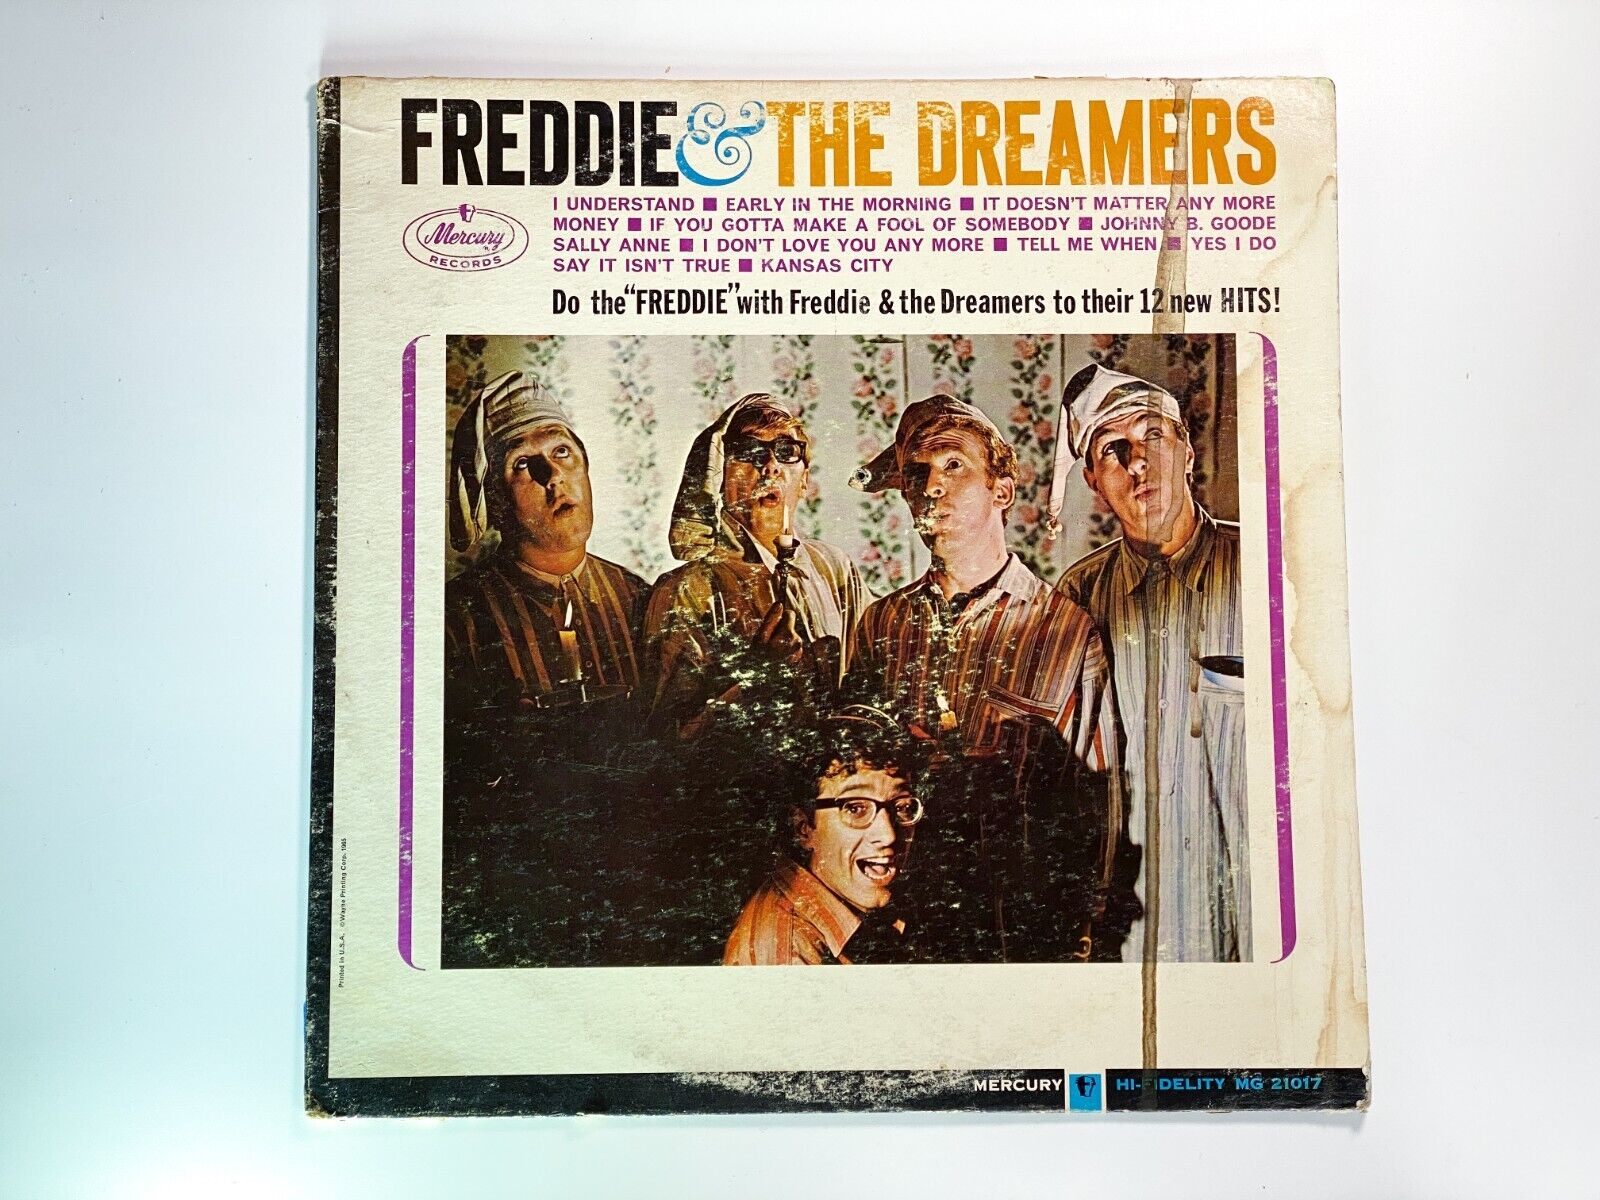 Freddie and the Dreamers | 12 New Hits | Mercury Records Vinyl MG 21017  VG+/VG+